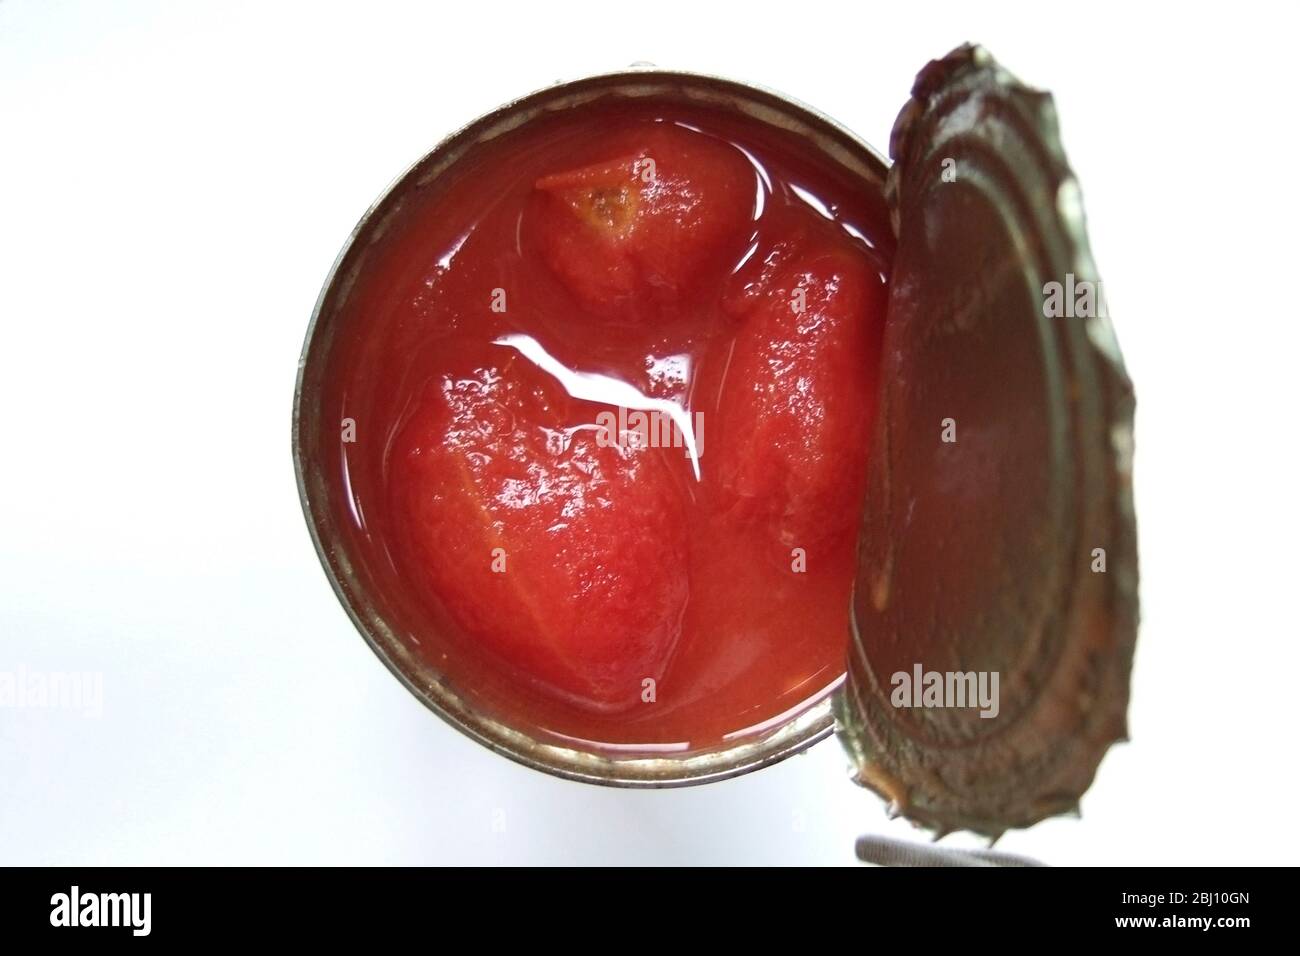 Opened can of plum tomatoes seen from above - Stock Photo